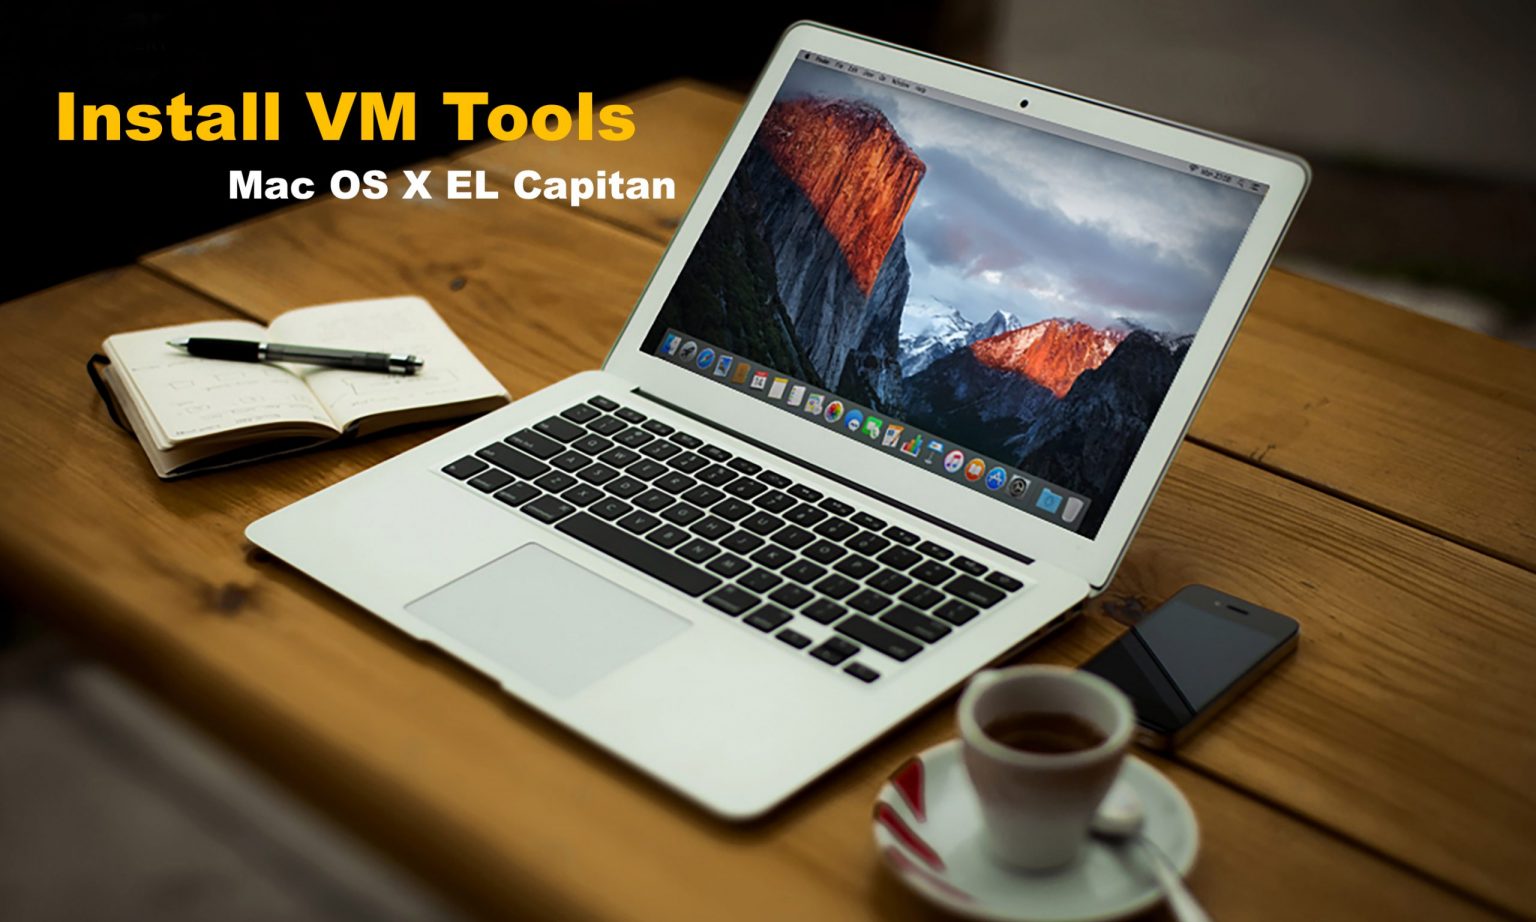 vmware tools for mac os high sierra download